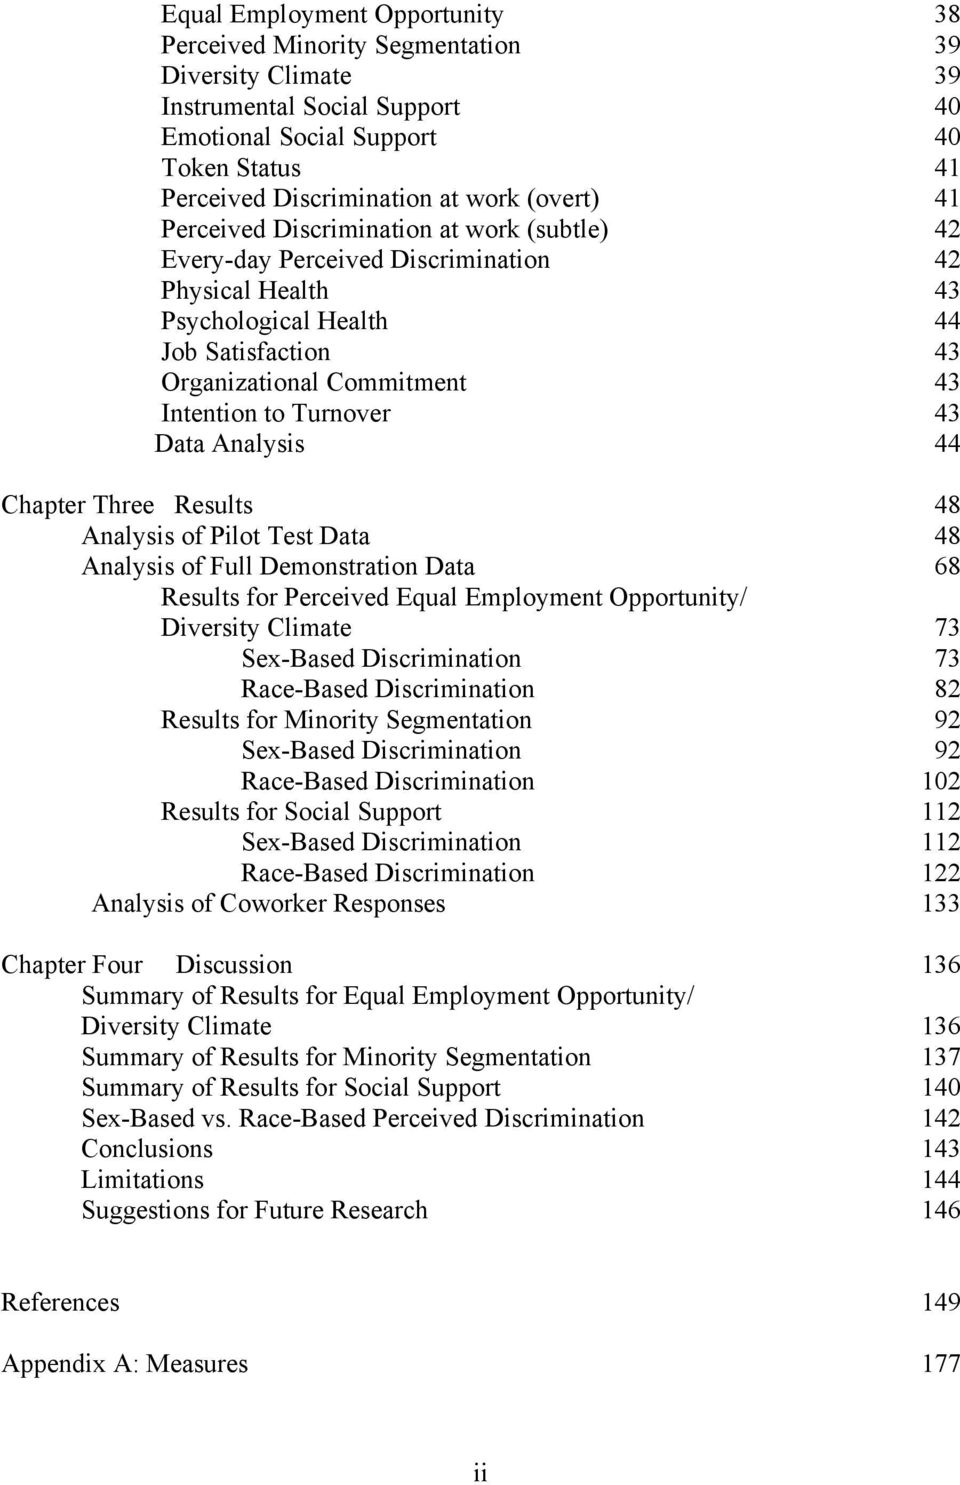 Turnover 43 Data Analysis 44 Chapter Three Results 48 Analysis of Pilot Test Data 48 Analysis of Full Demonstration Data 68 Results for Perceived Equal Employment Opportunity/ Diversity Climate 73